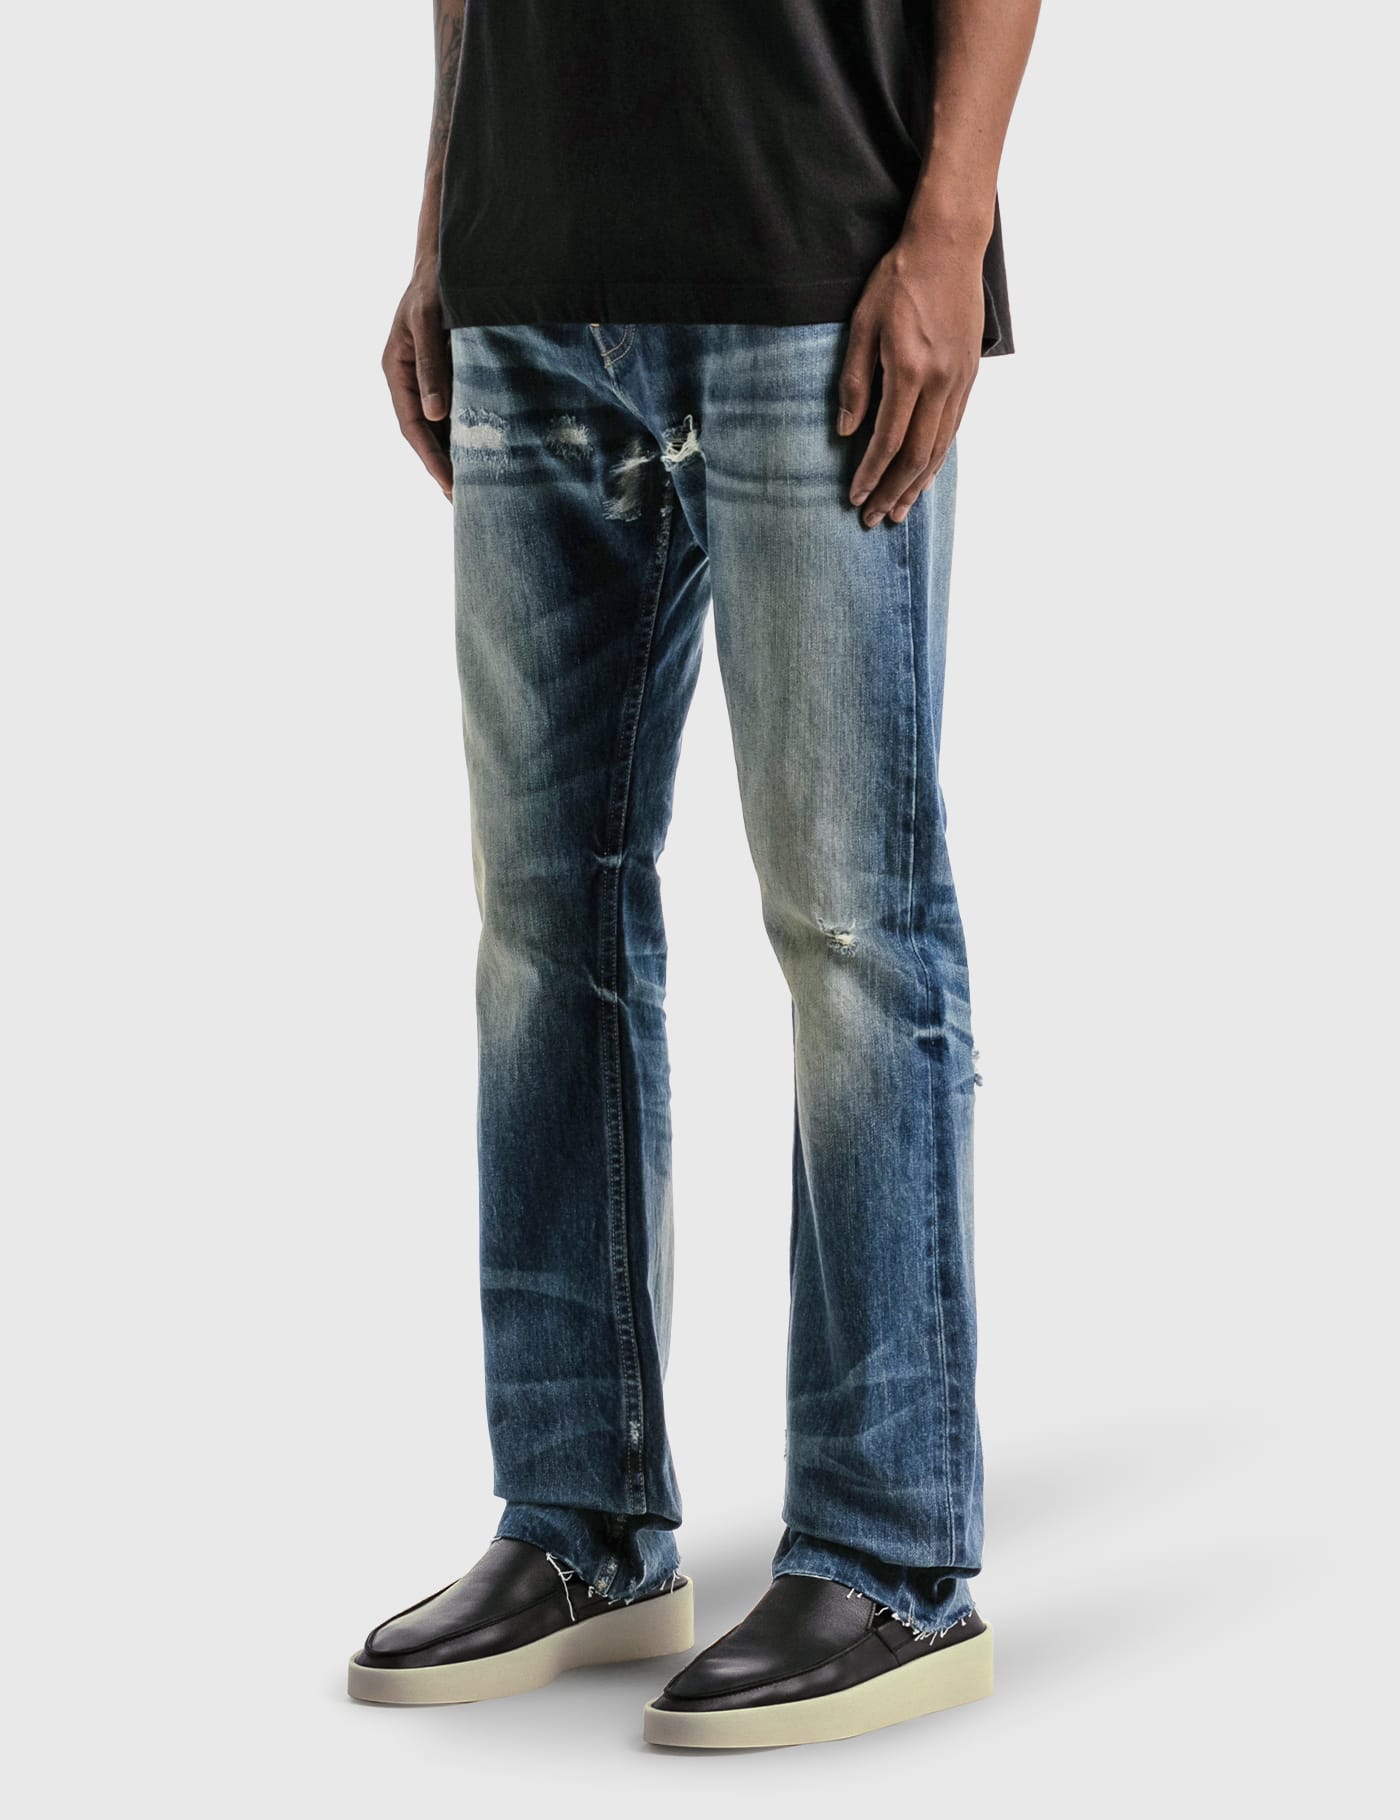 Fear of God - 7th Collection Denim Jeans | HBX - Globally Curated 